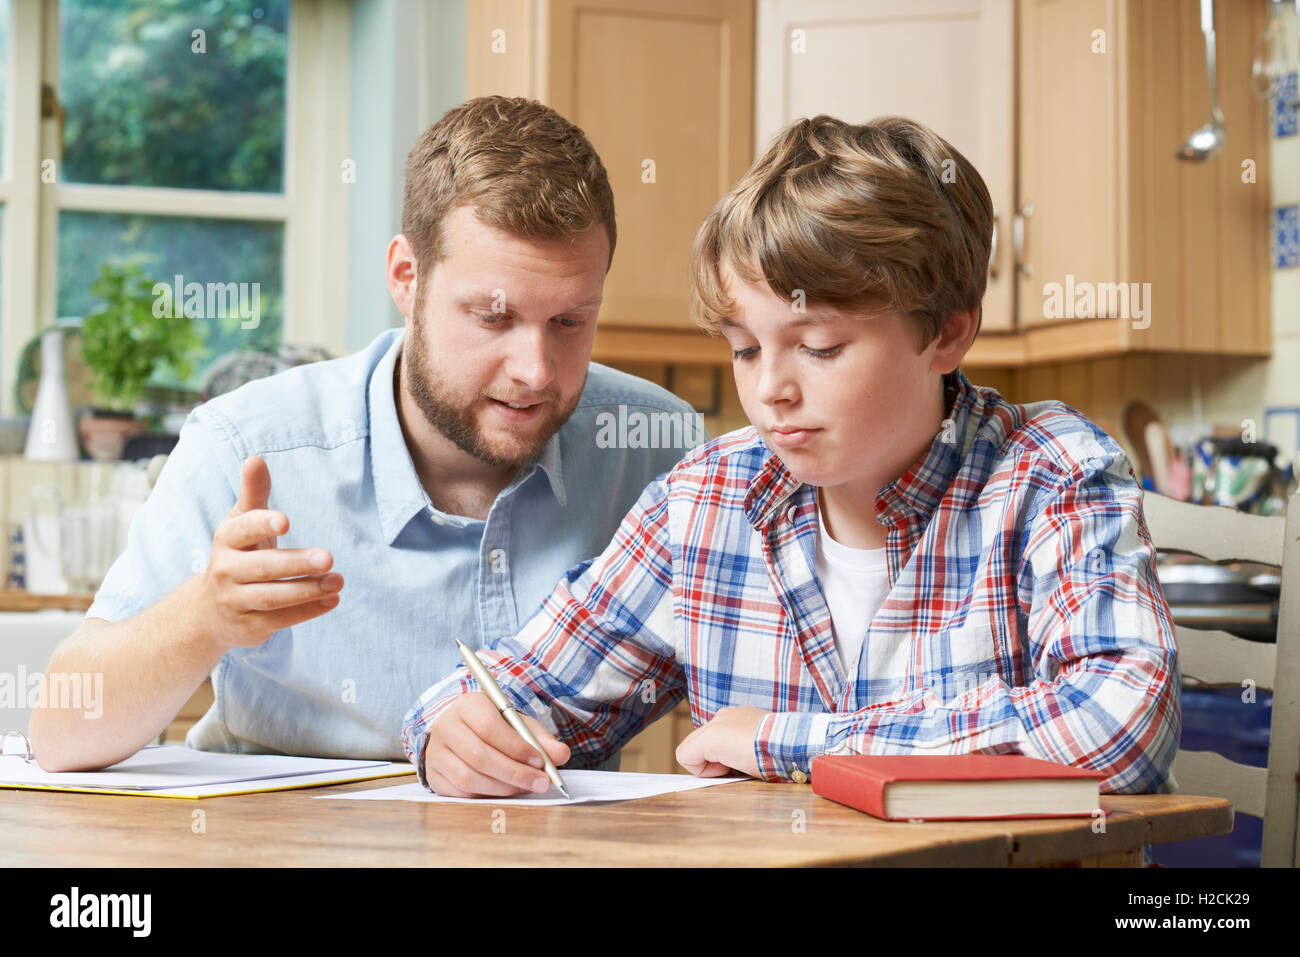 Male Home Tutor Helping Boy With Studies Stock Photo